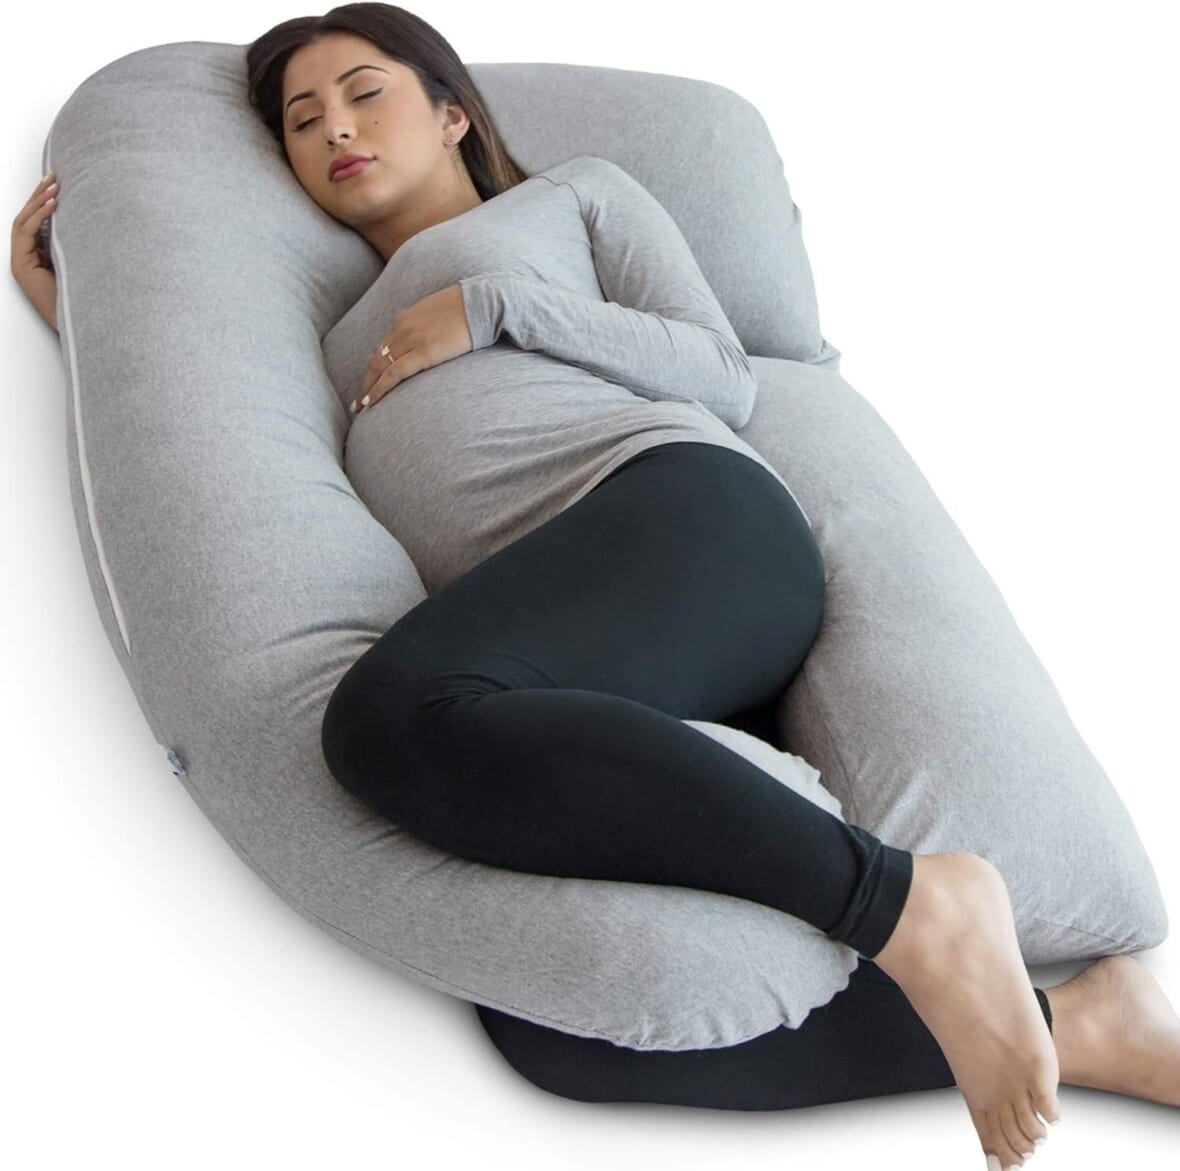 what is a pregnancy pillow?